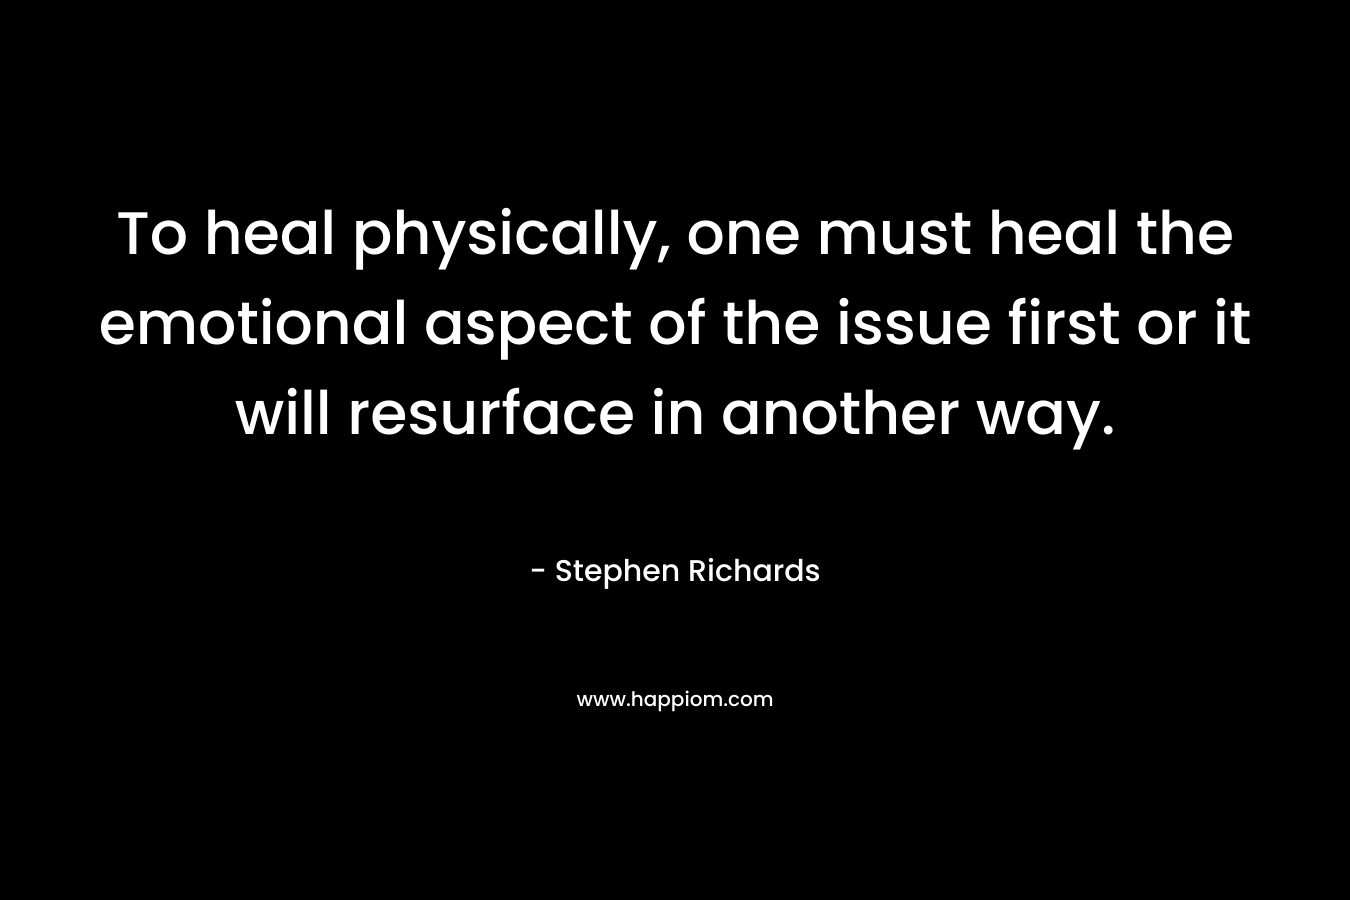 To heal physically, one must heal the emotional aspect of the issue first or it will resurface in another way.